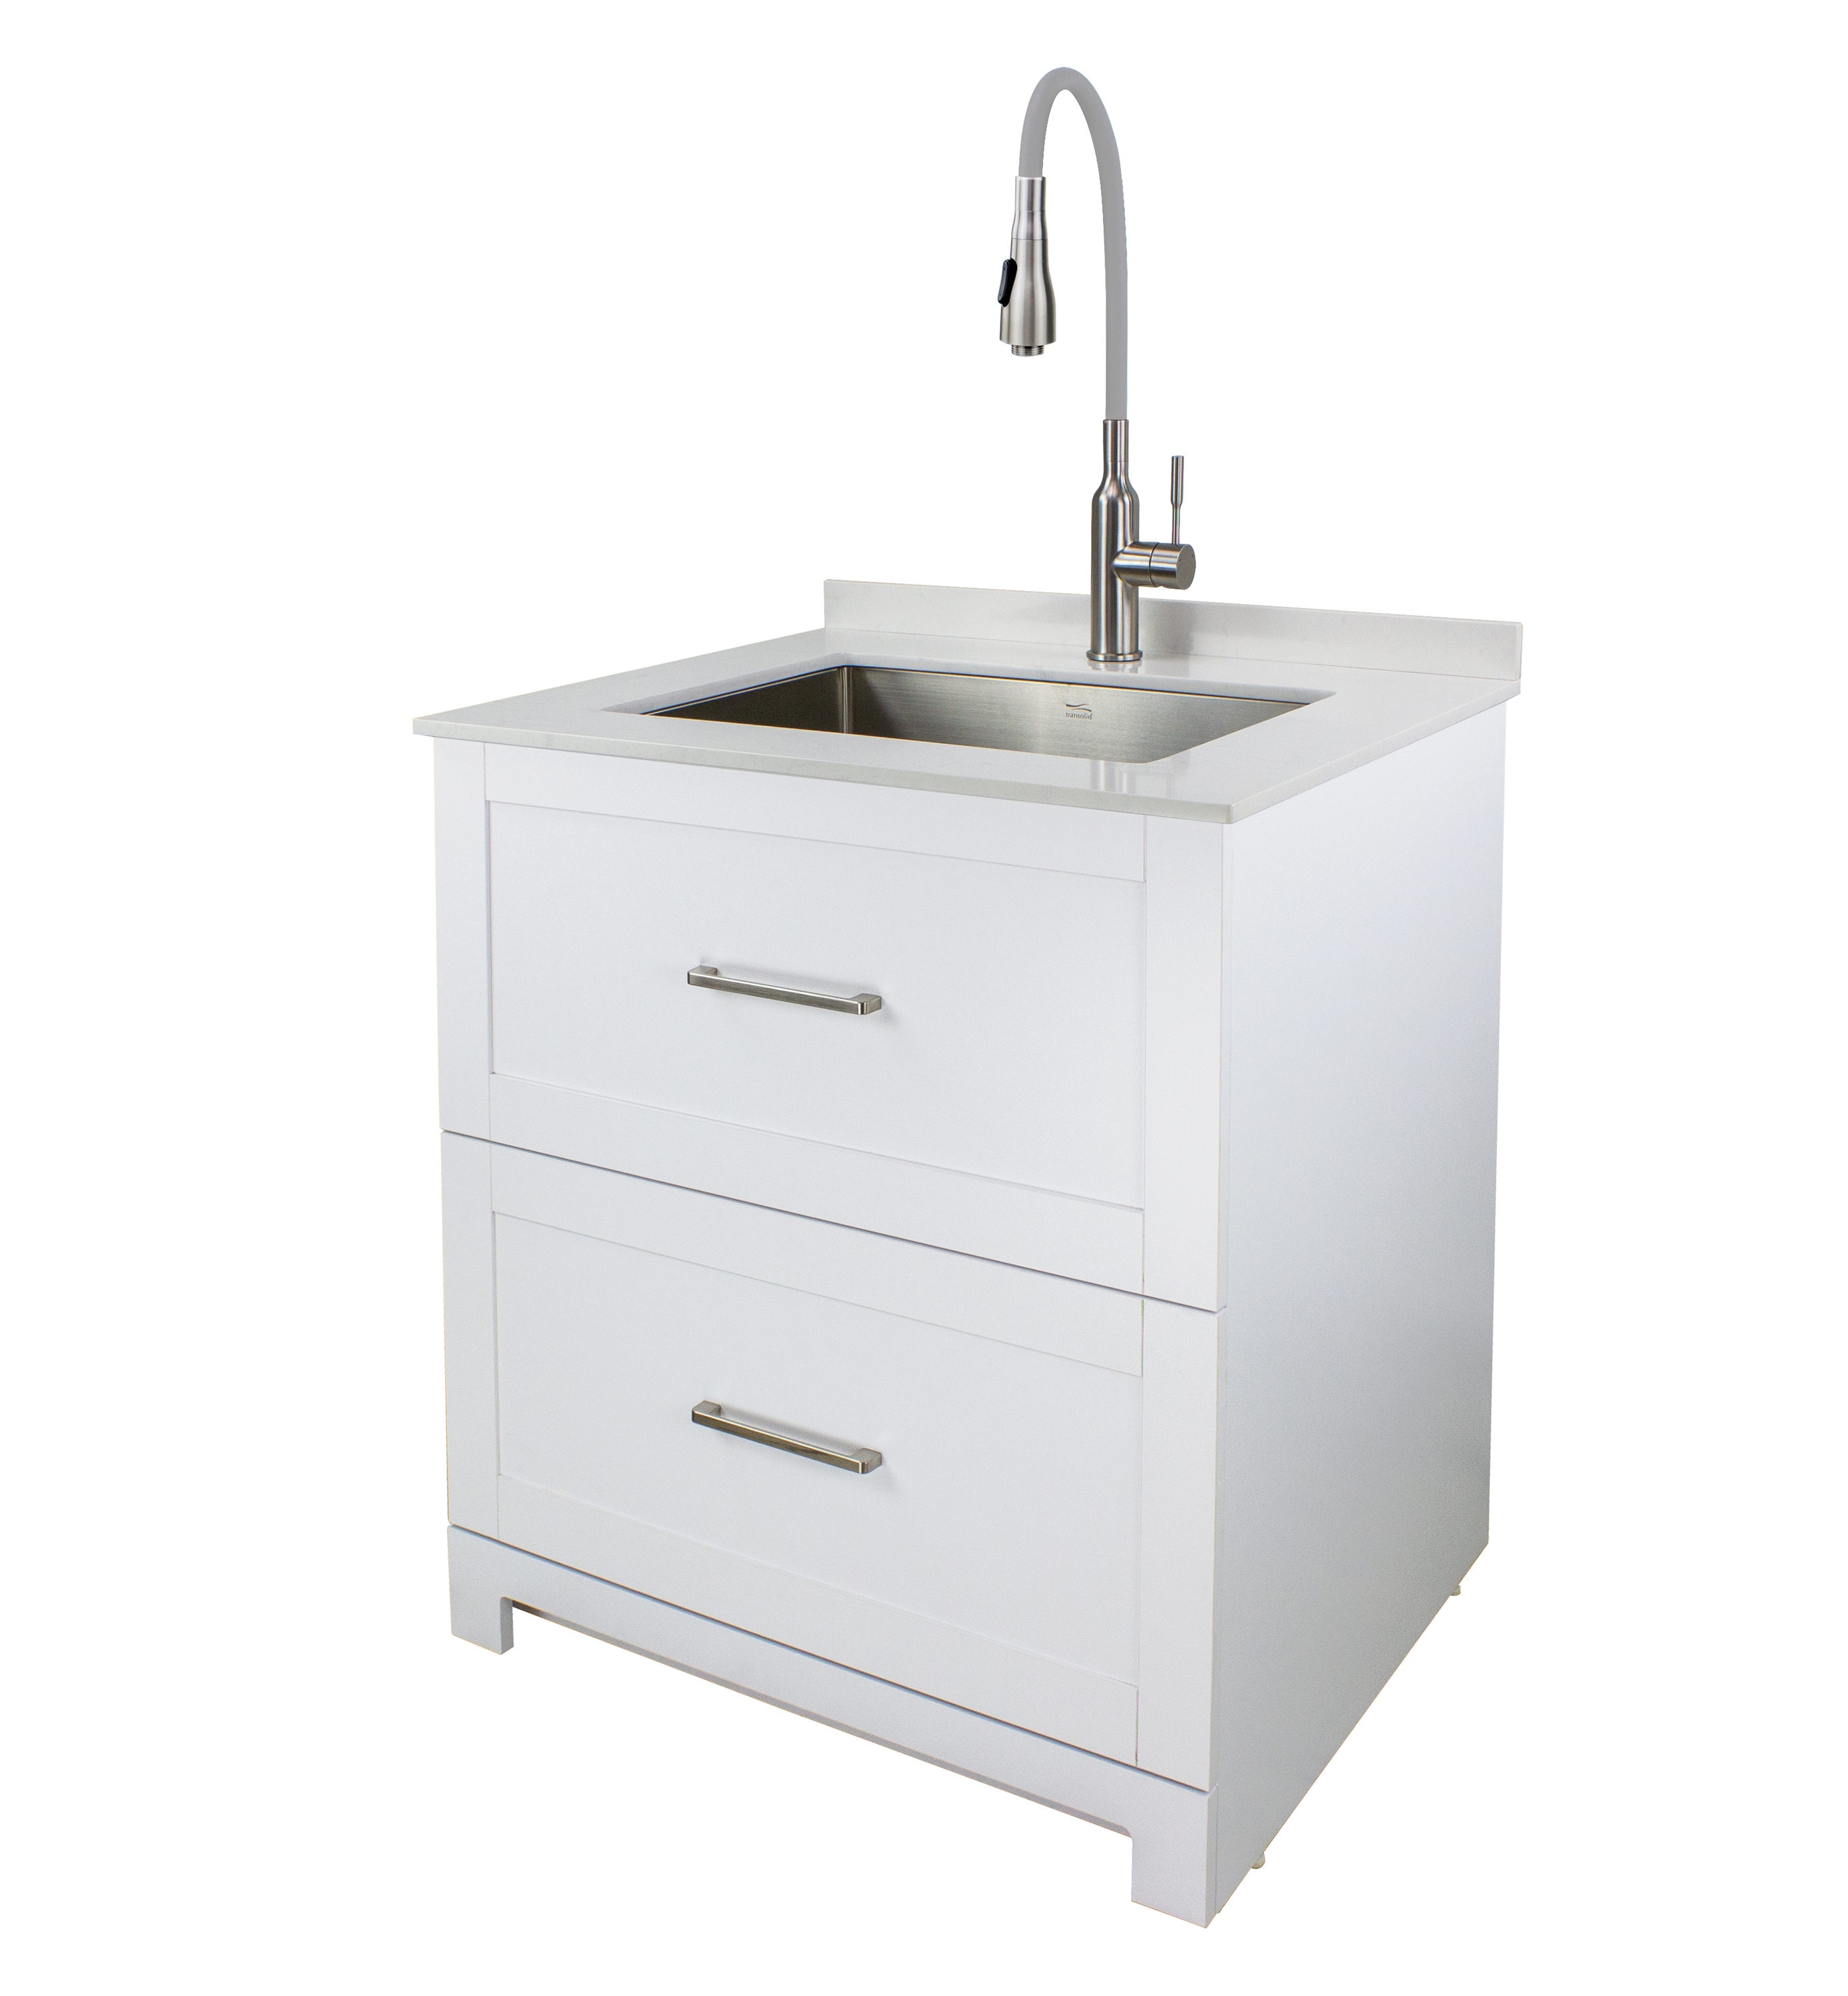 Freestanding Laundry Sink With Faucet